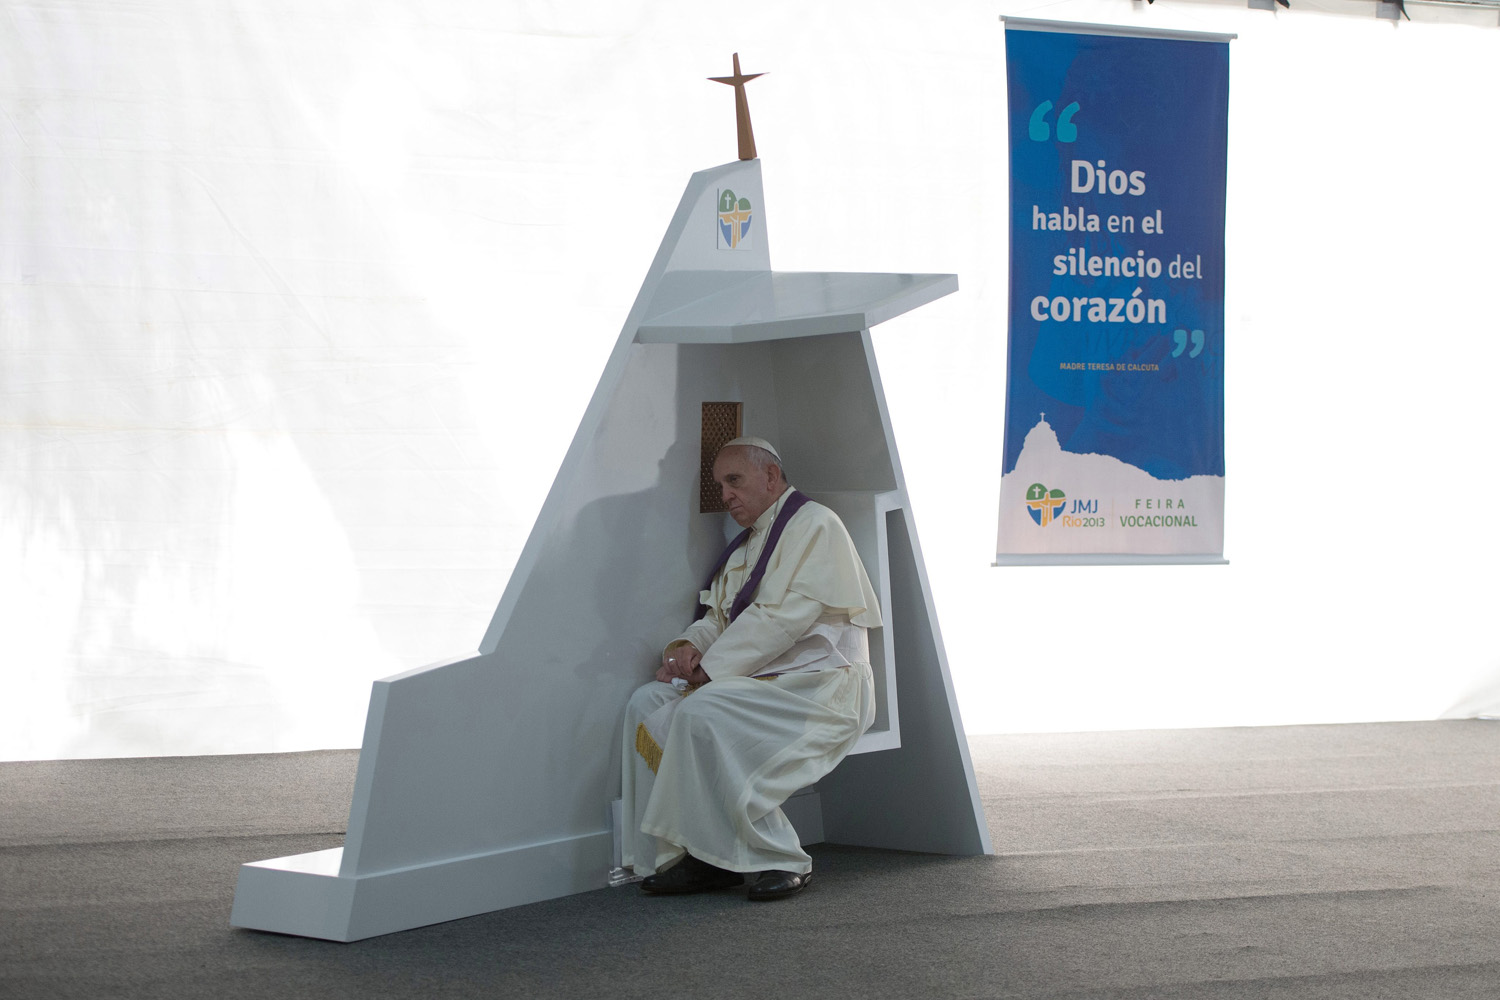 July 26, 2013. A handout photo made available by the Vatican newspaper Osservatore Romano shows Pope Francis (R) hearing confessions of young people in the park of Quinta Da Boa Vista in Rio de Janeiro in Brazil.